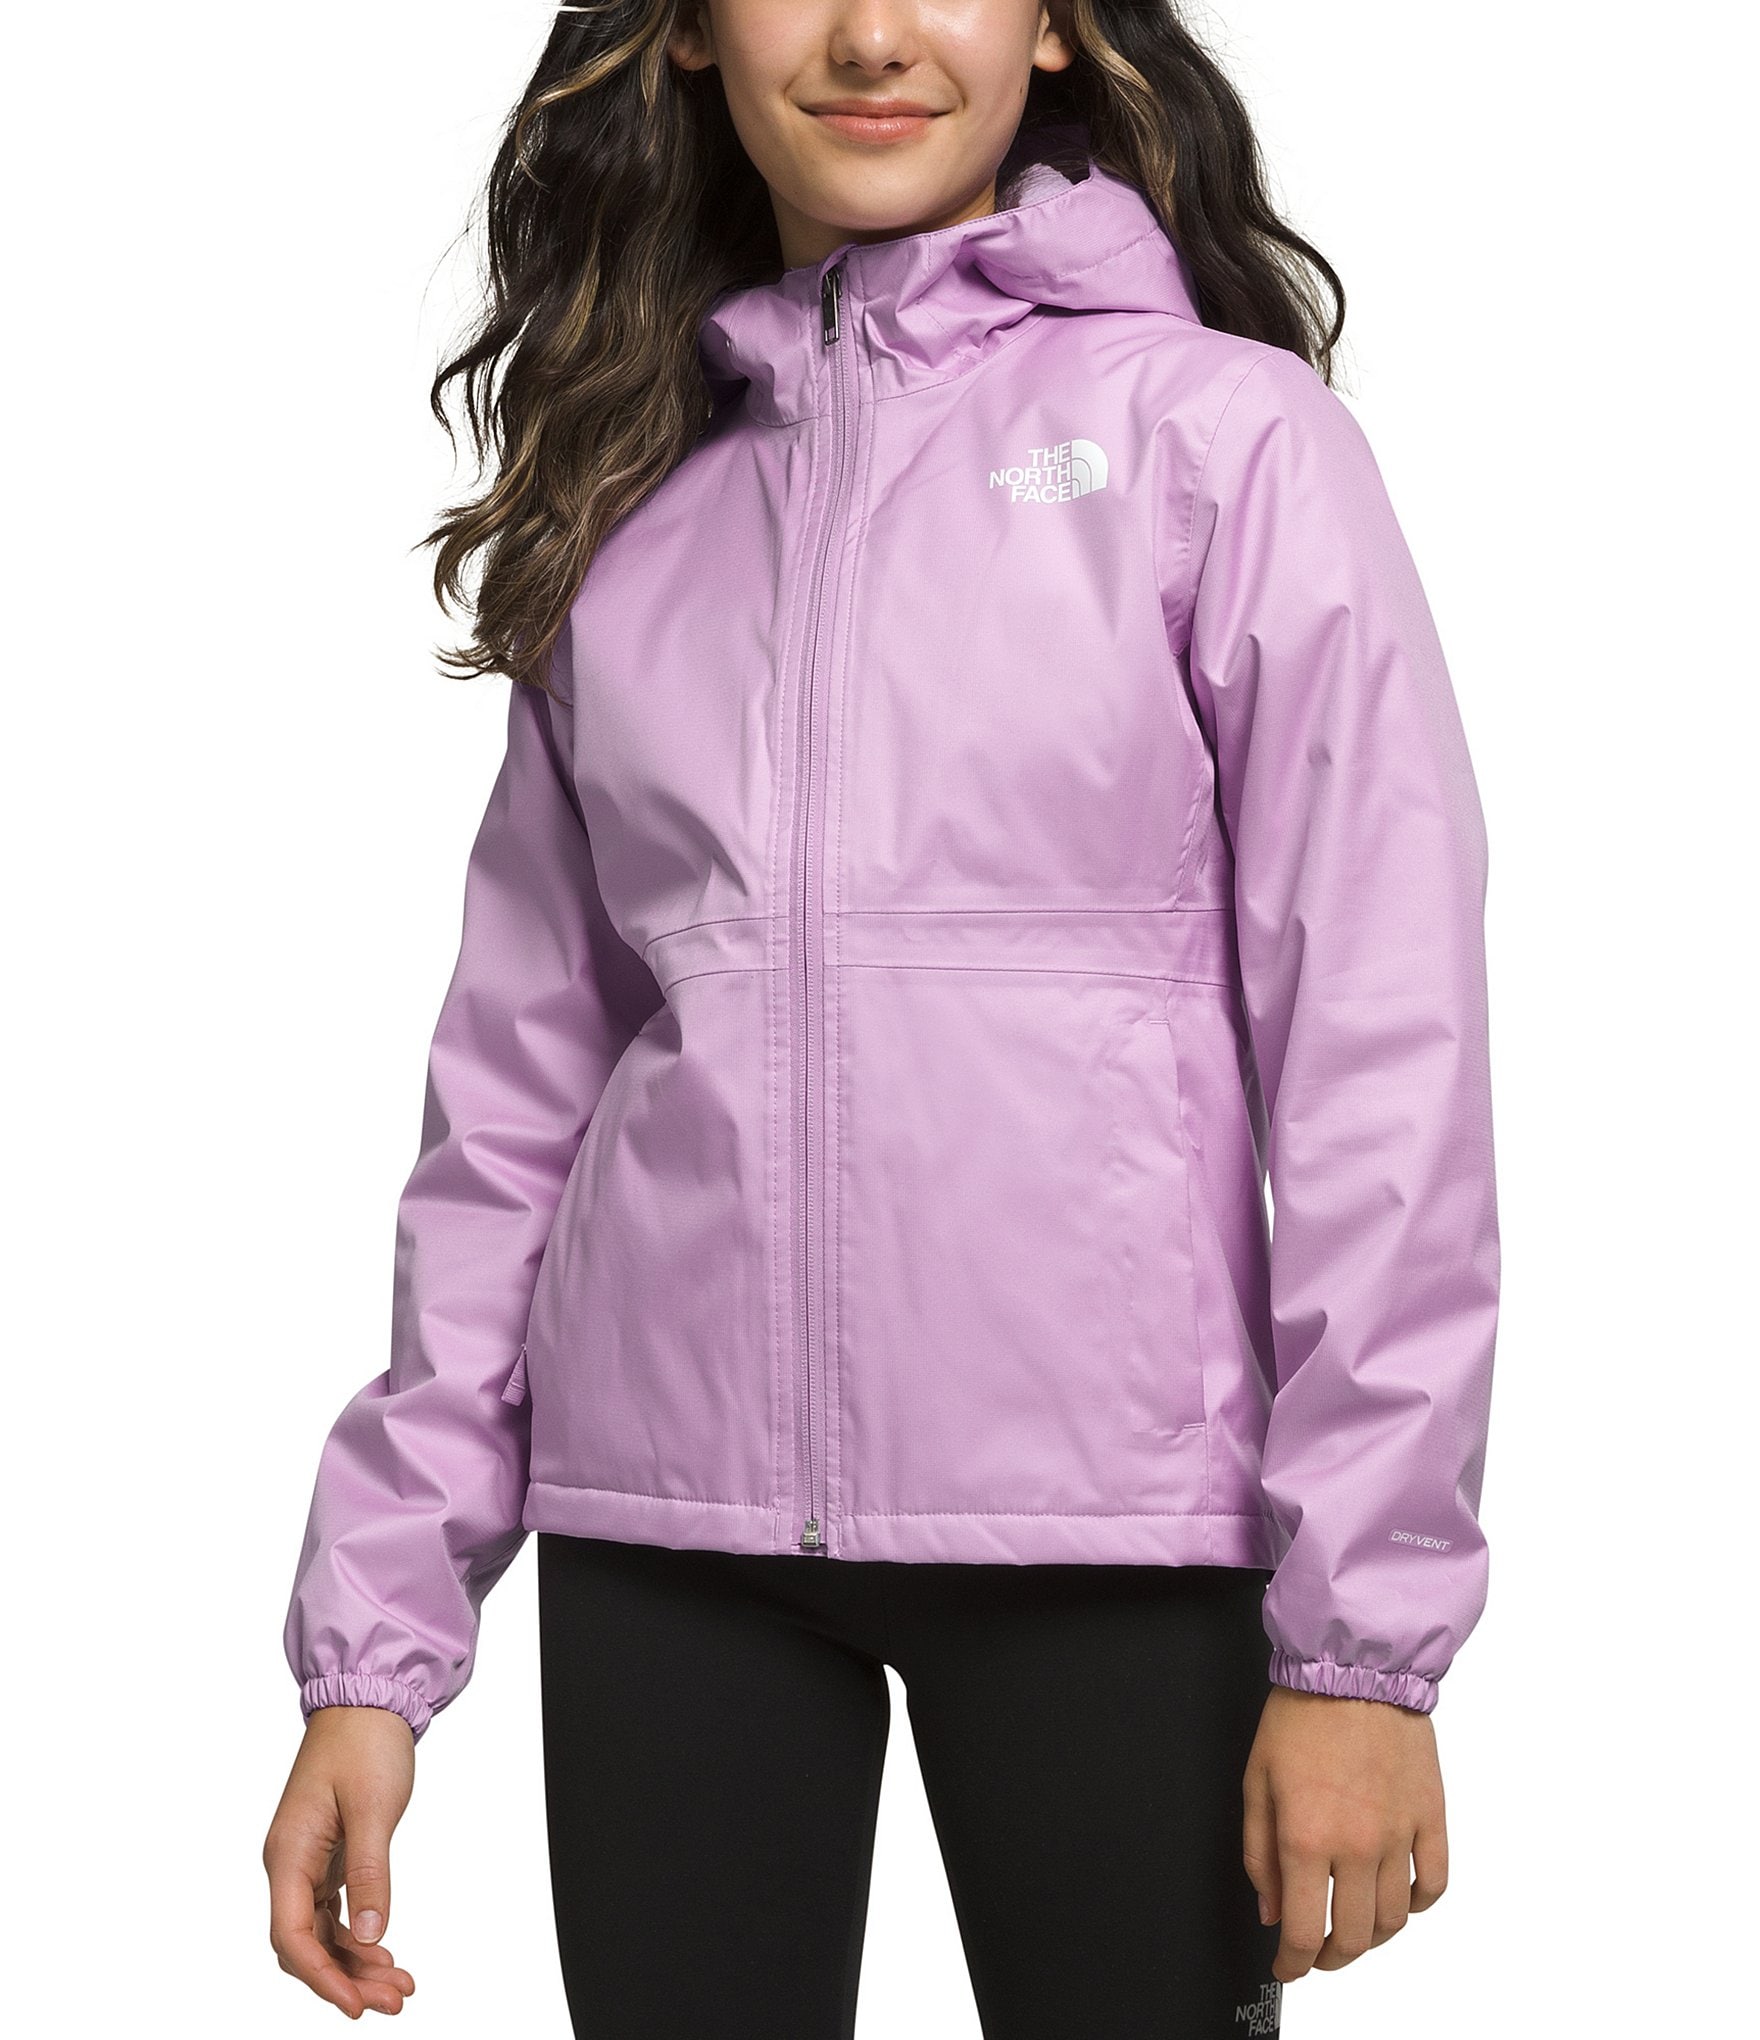 The North Face Girls Reversible Mossbud Jacket | WinterKids